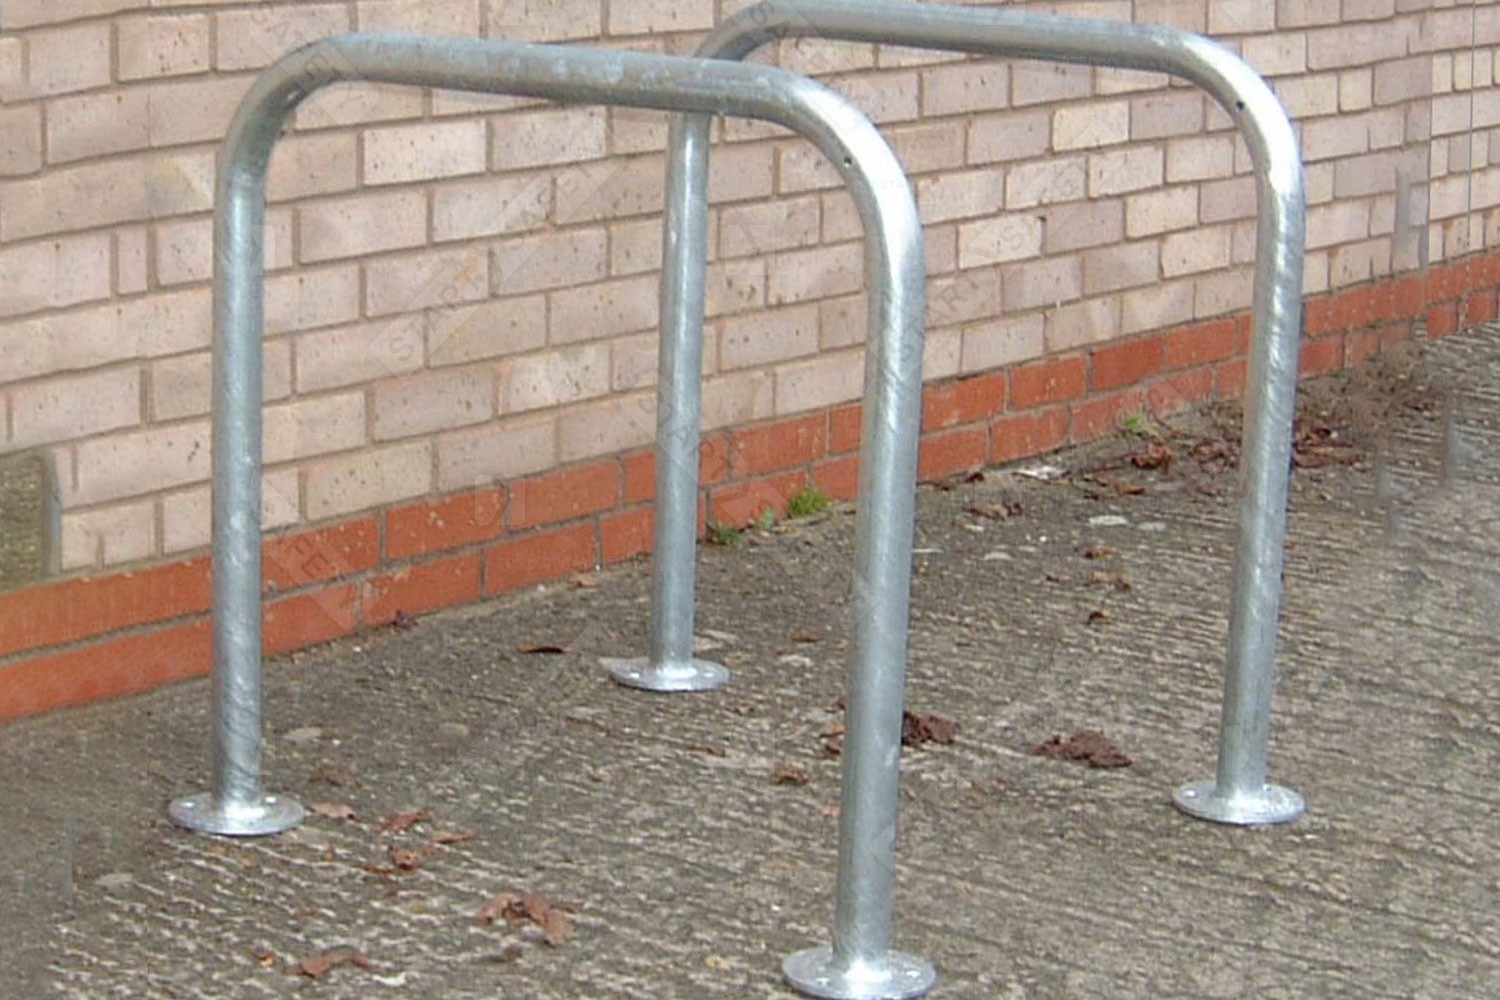 Sheffield cycle stand installed into concrete pad